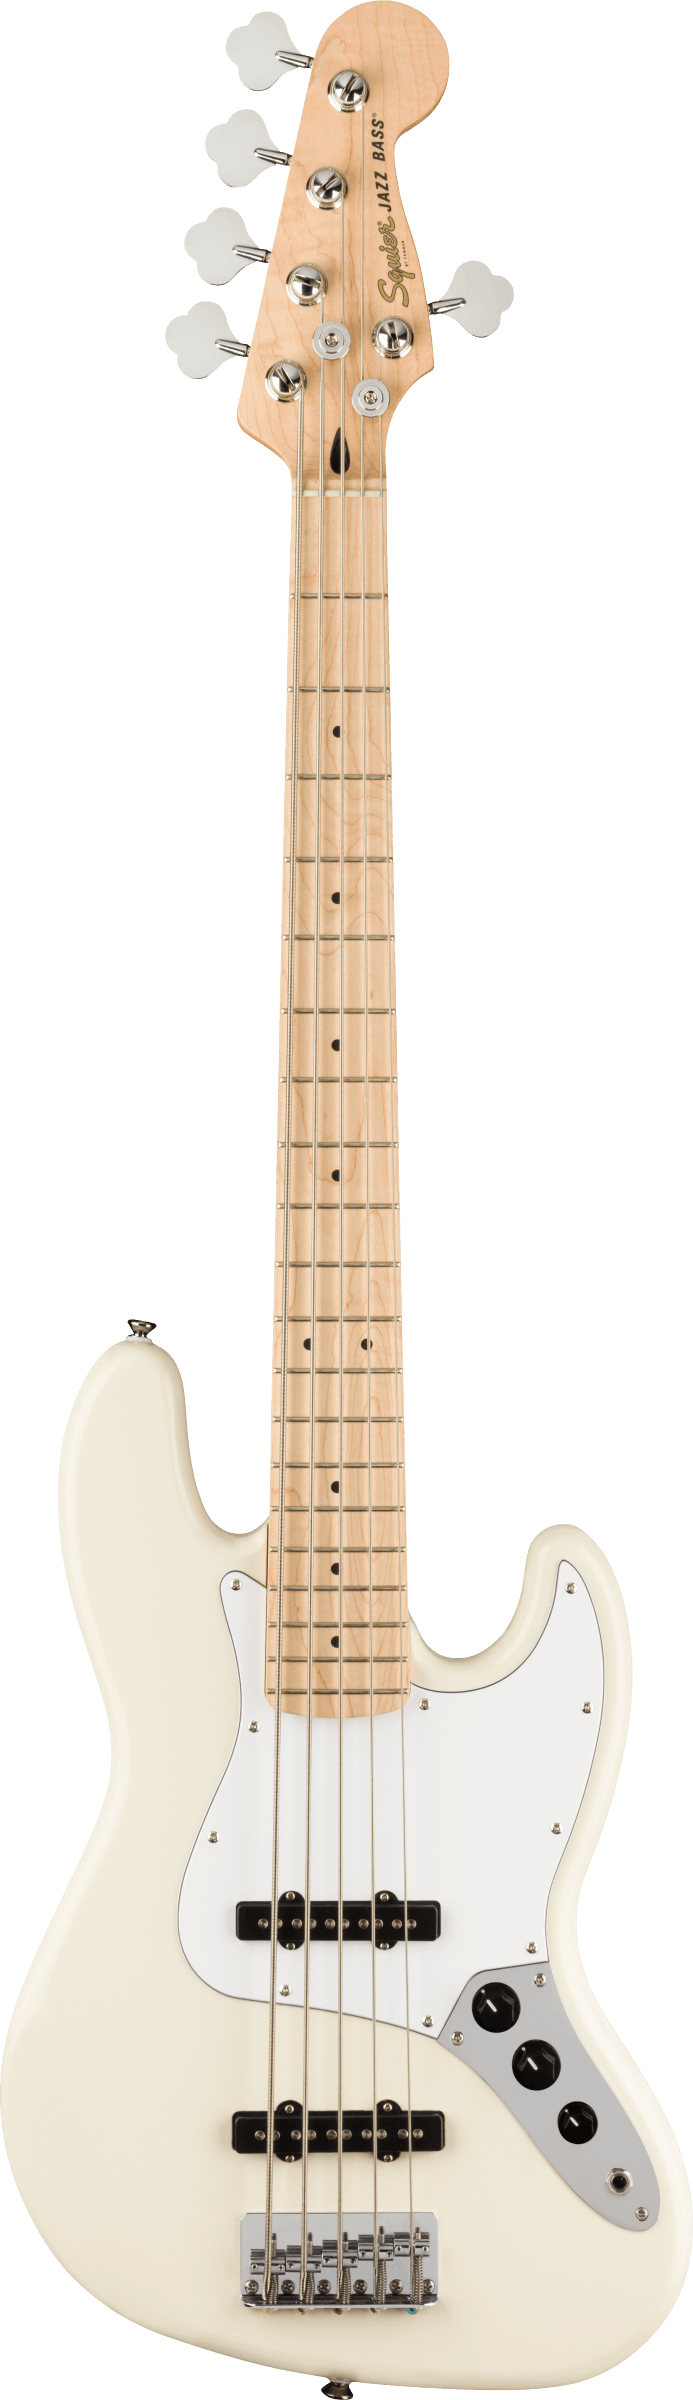 Squier Affinity Series Jazz Bass V (5-string) - Olympic White